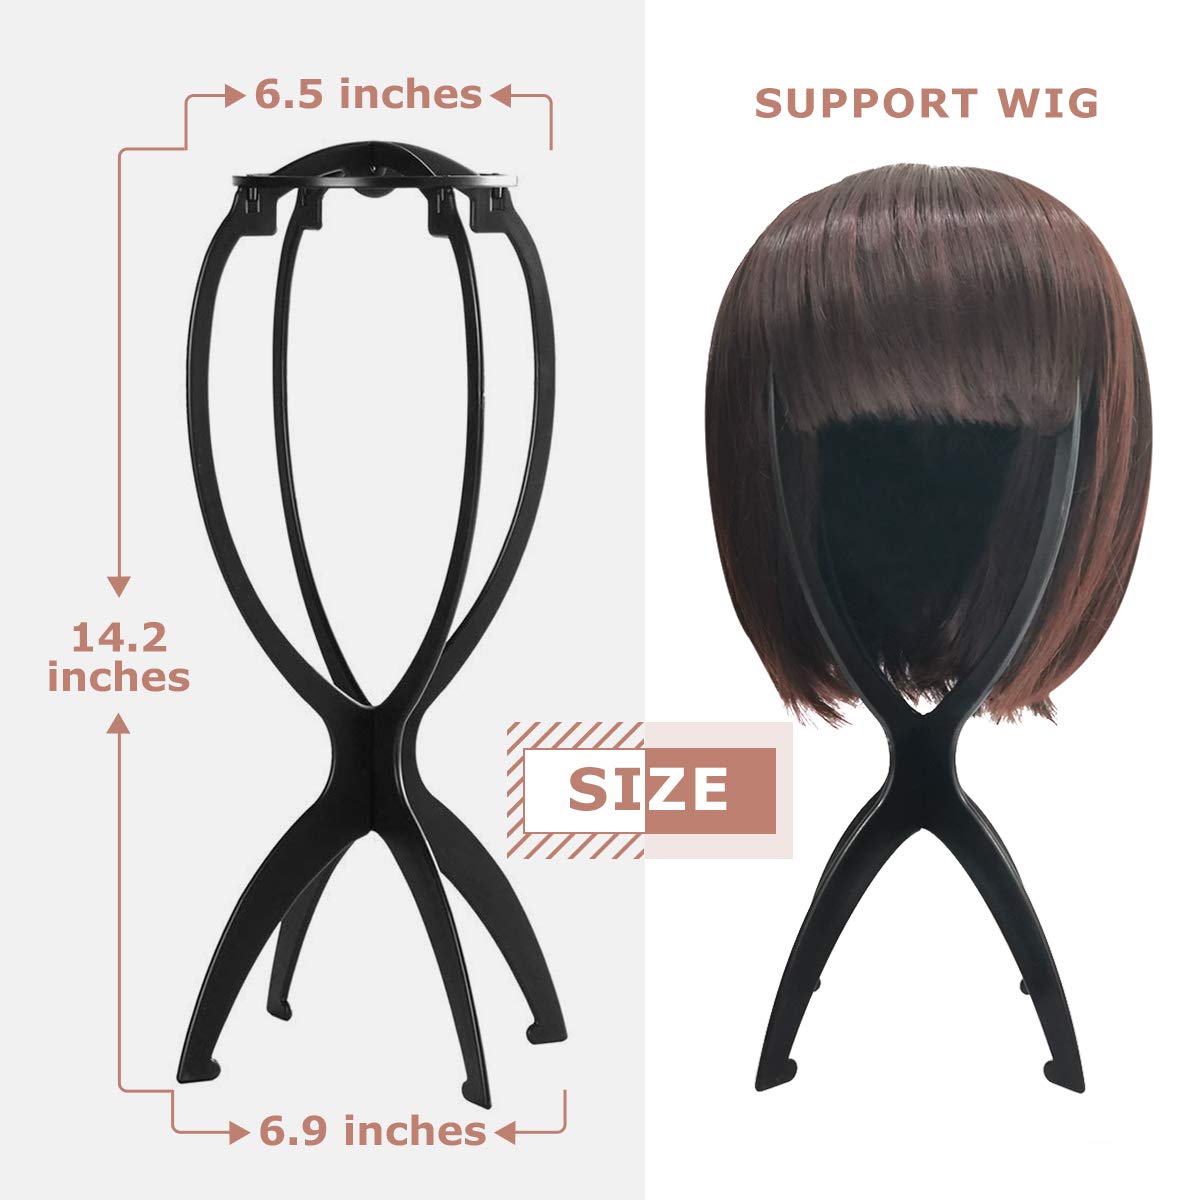 NOBLE wig stand | Plastic Wig Stand Folding Durable Hat Stand | Pack of 2 pieces black color - Noblehair